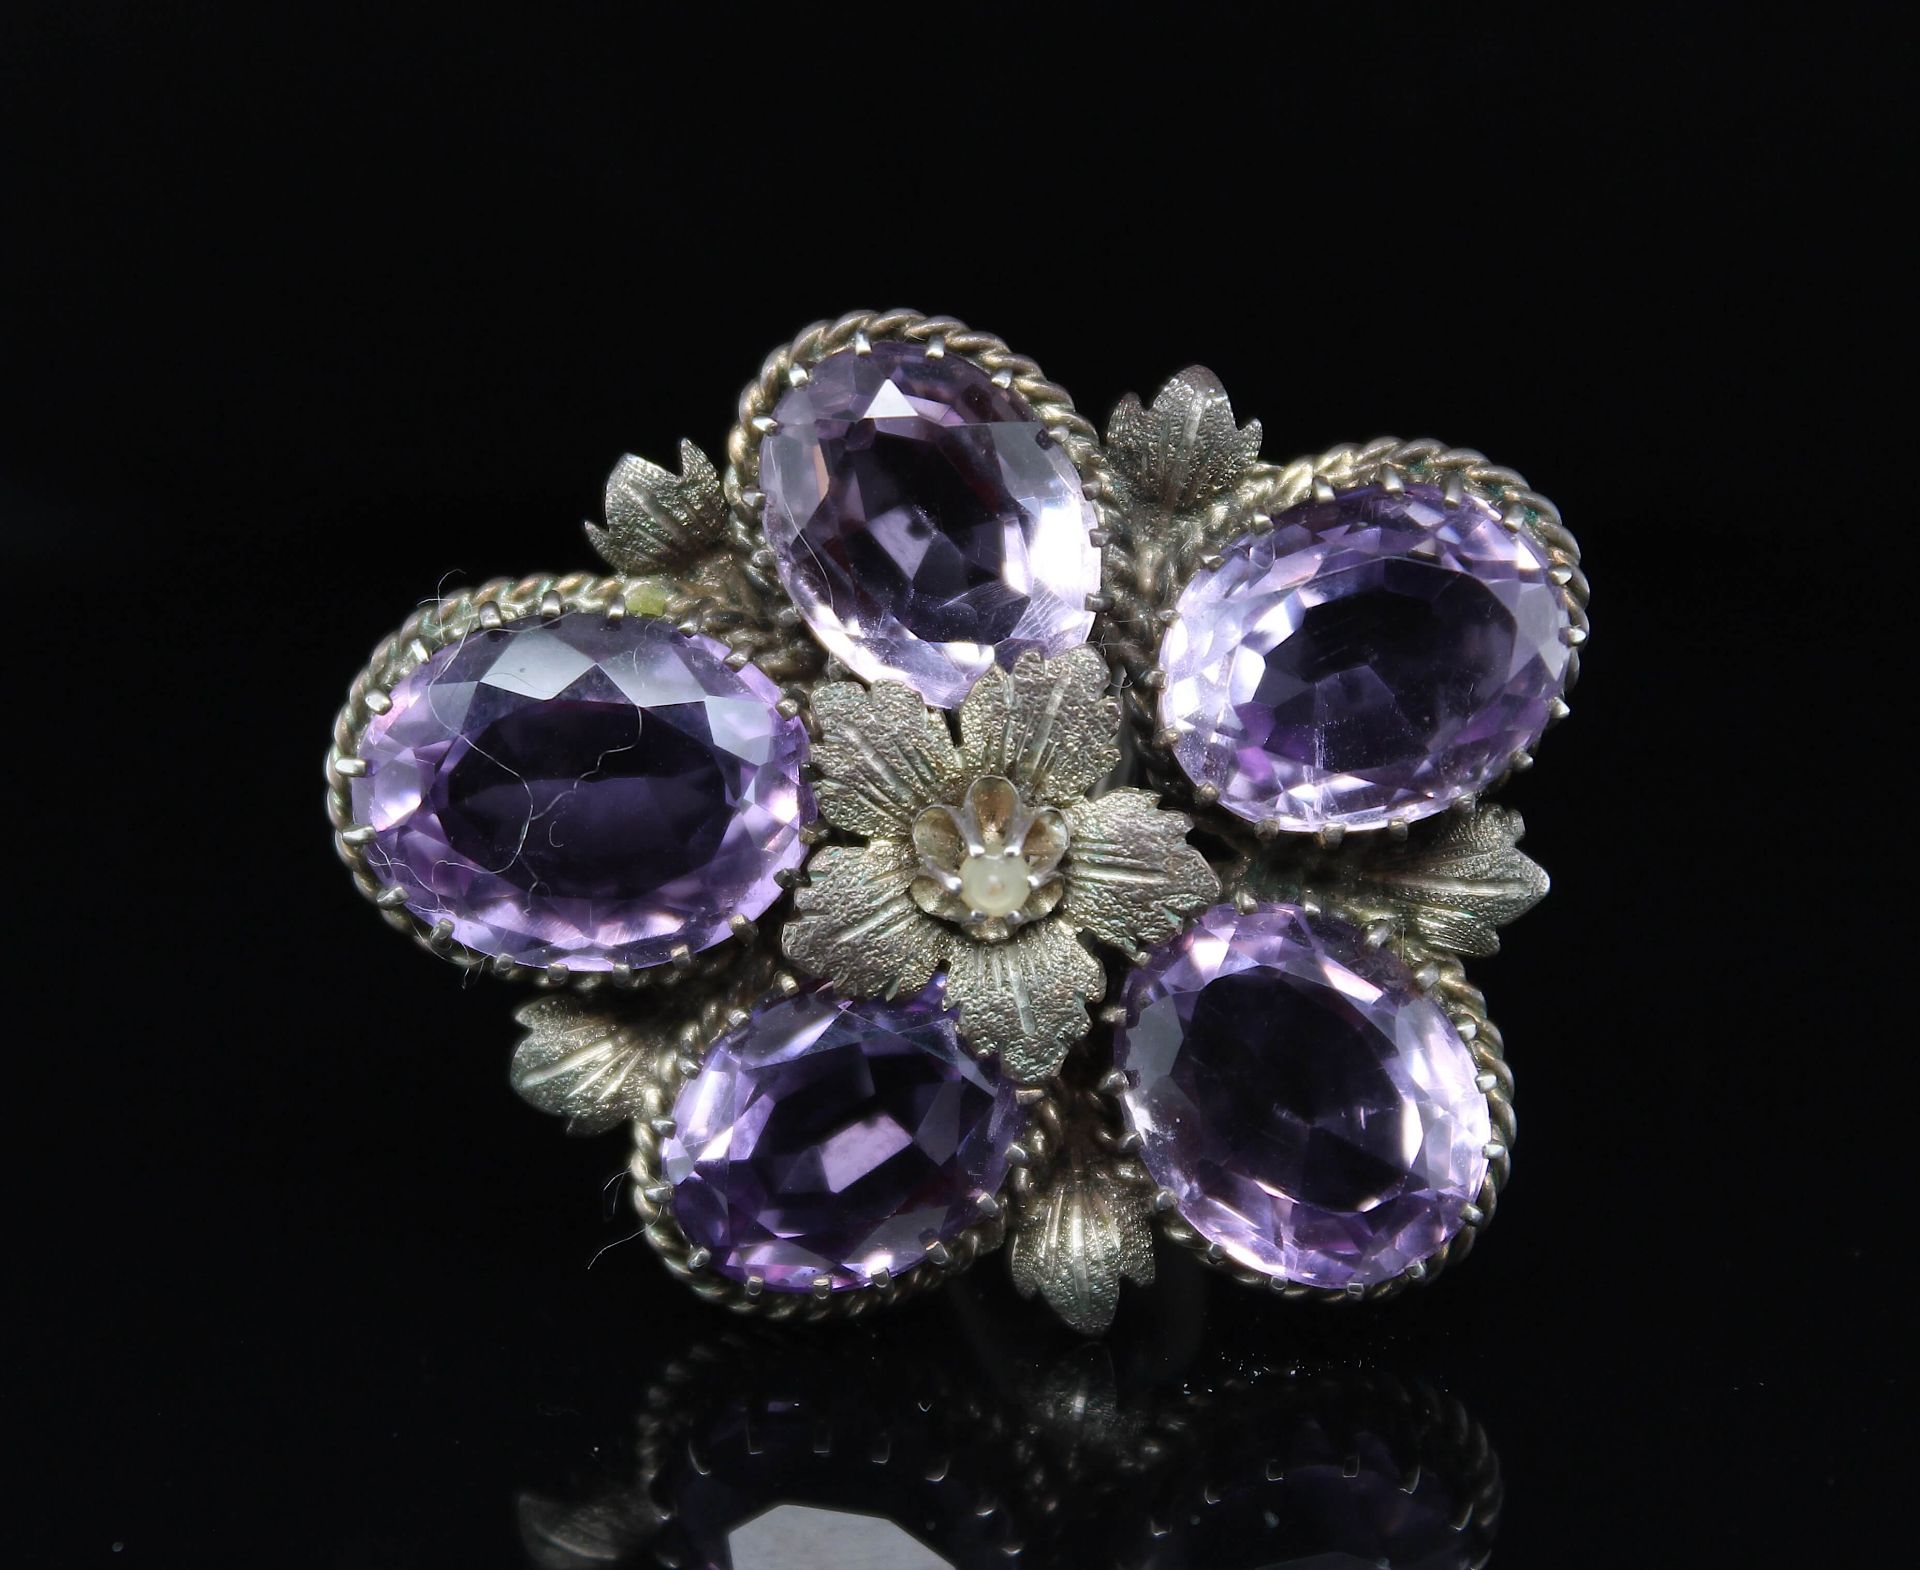 Silver brooch around 1900 with amethysts - Image 2 of 4